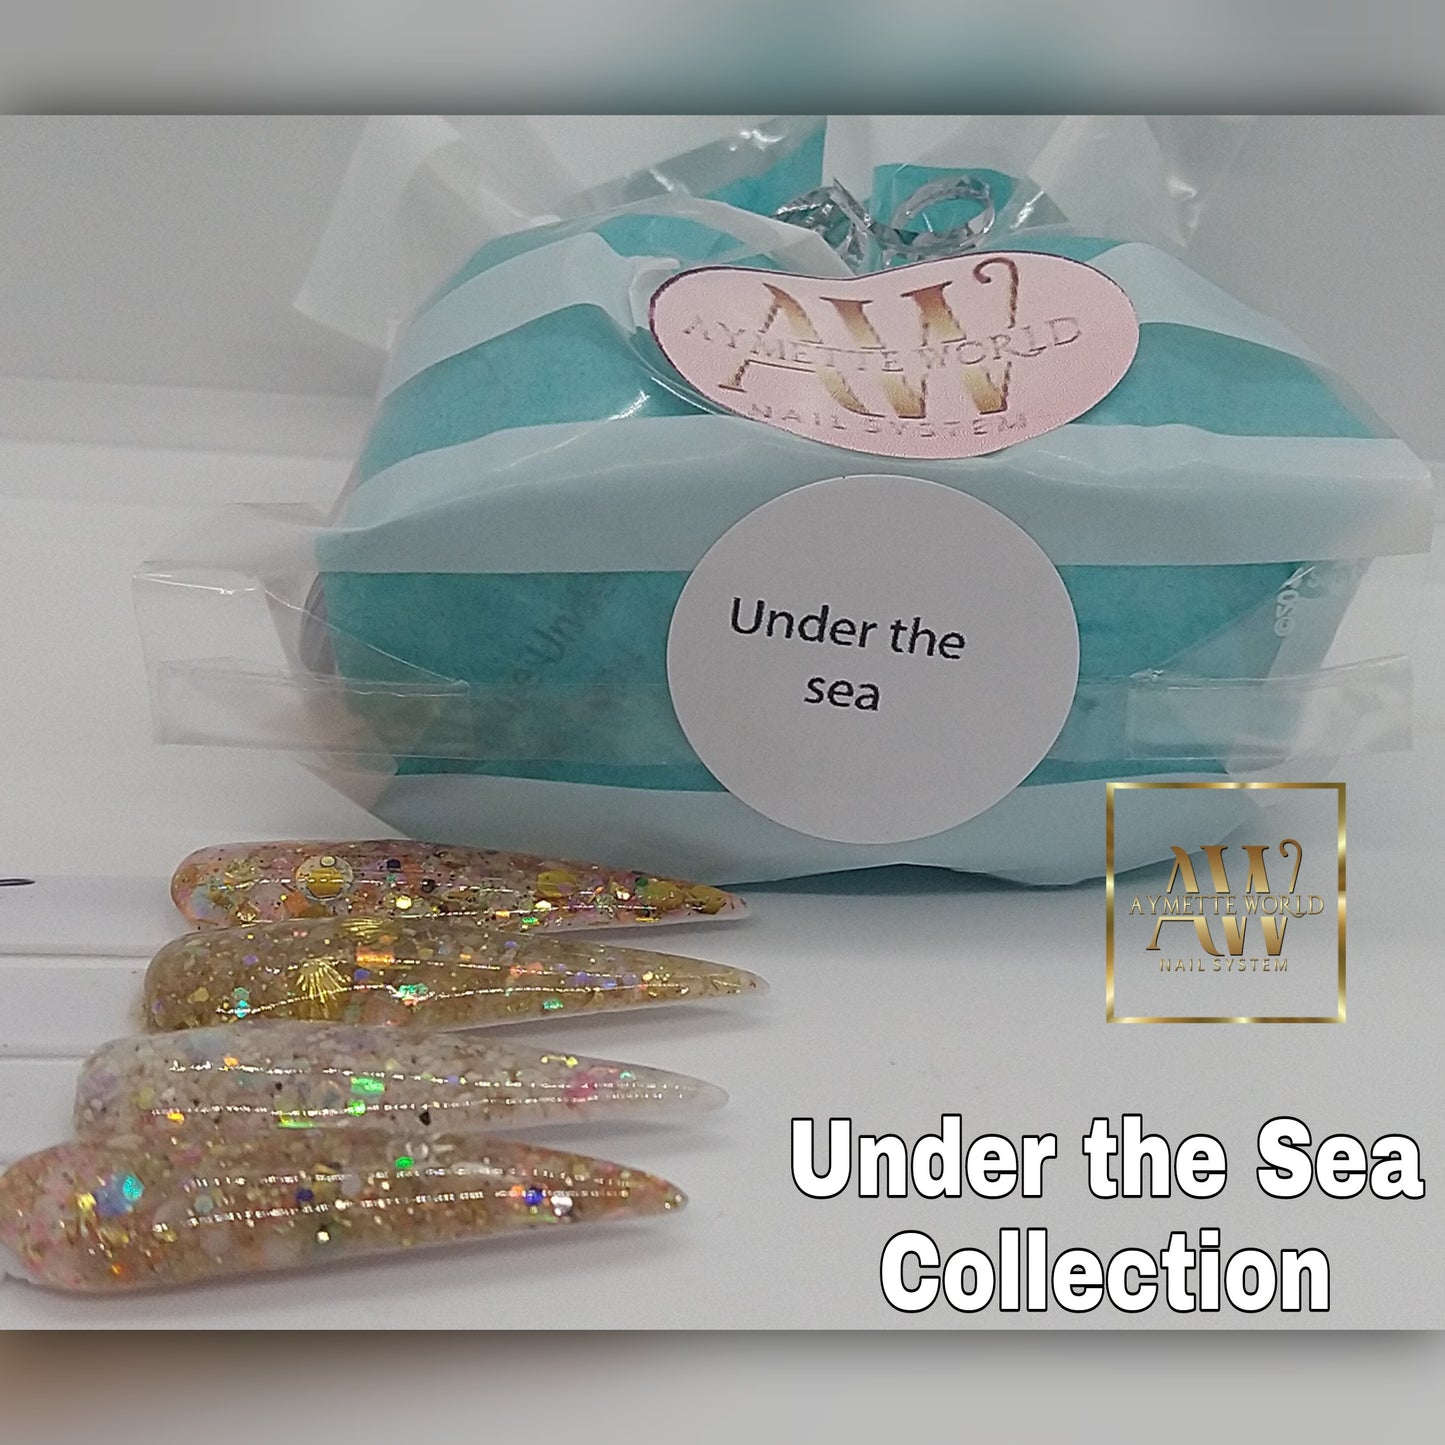 Under the sea Collection 10g